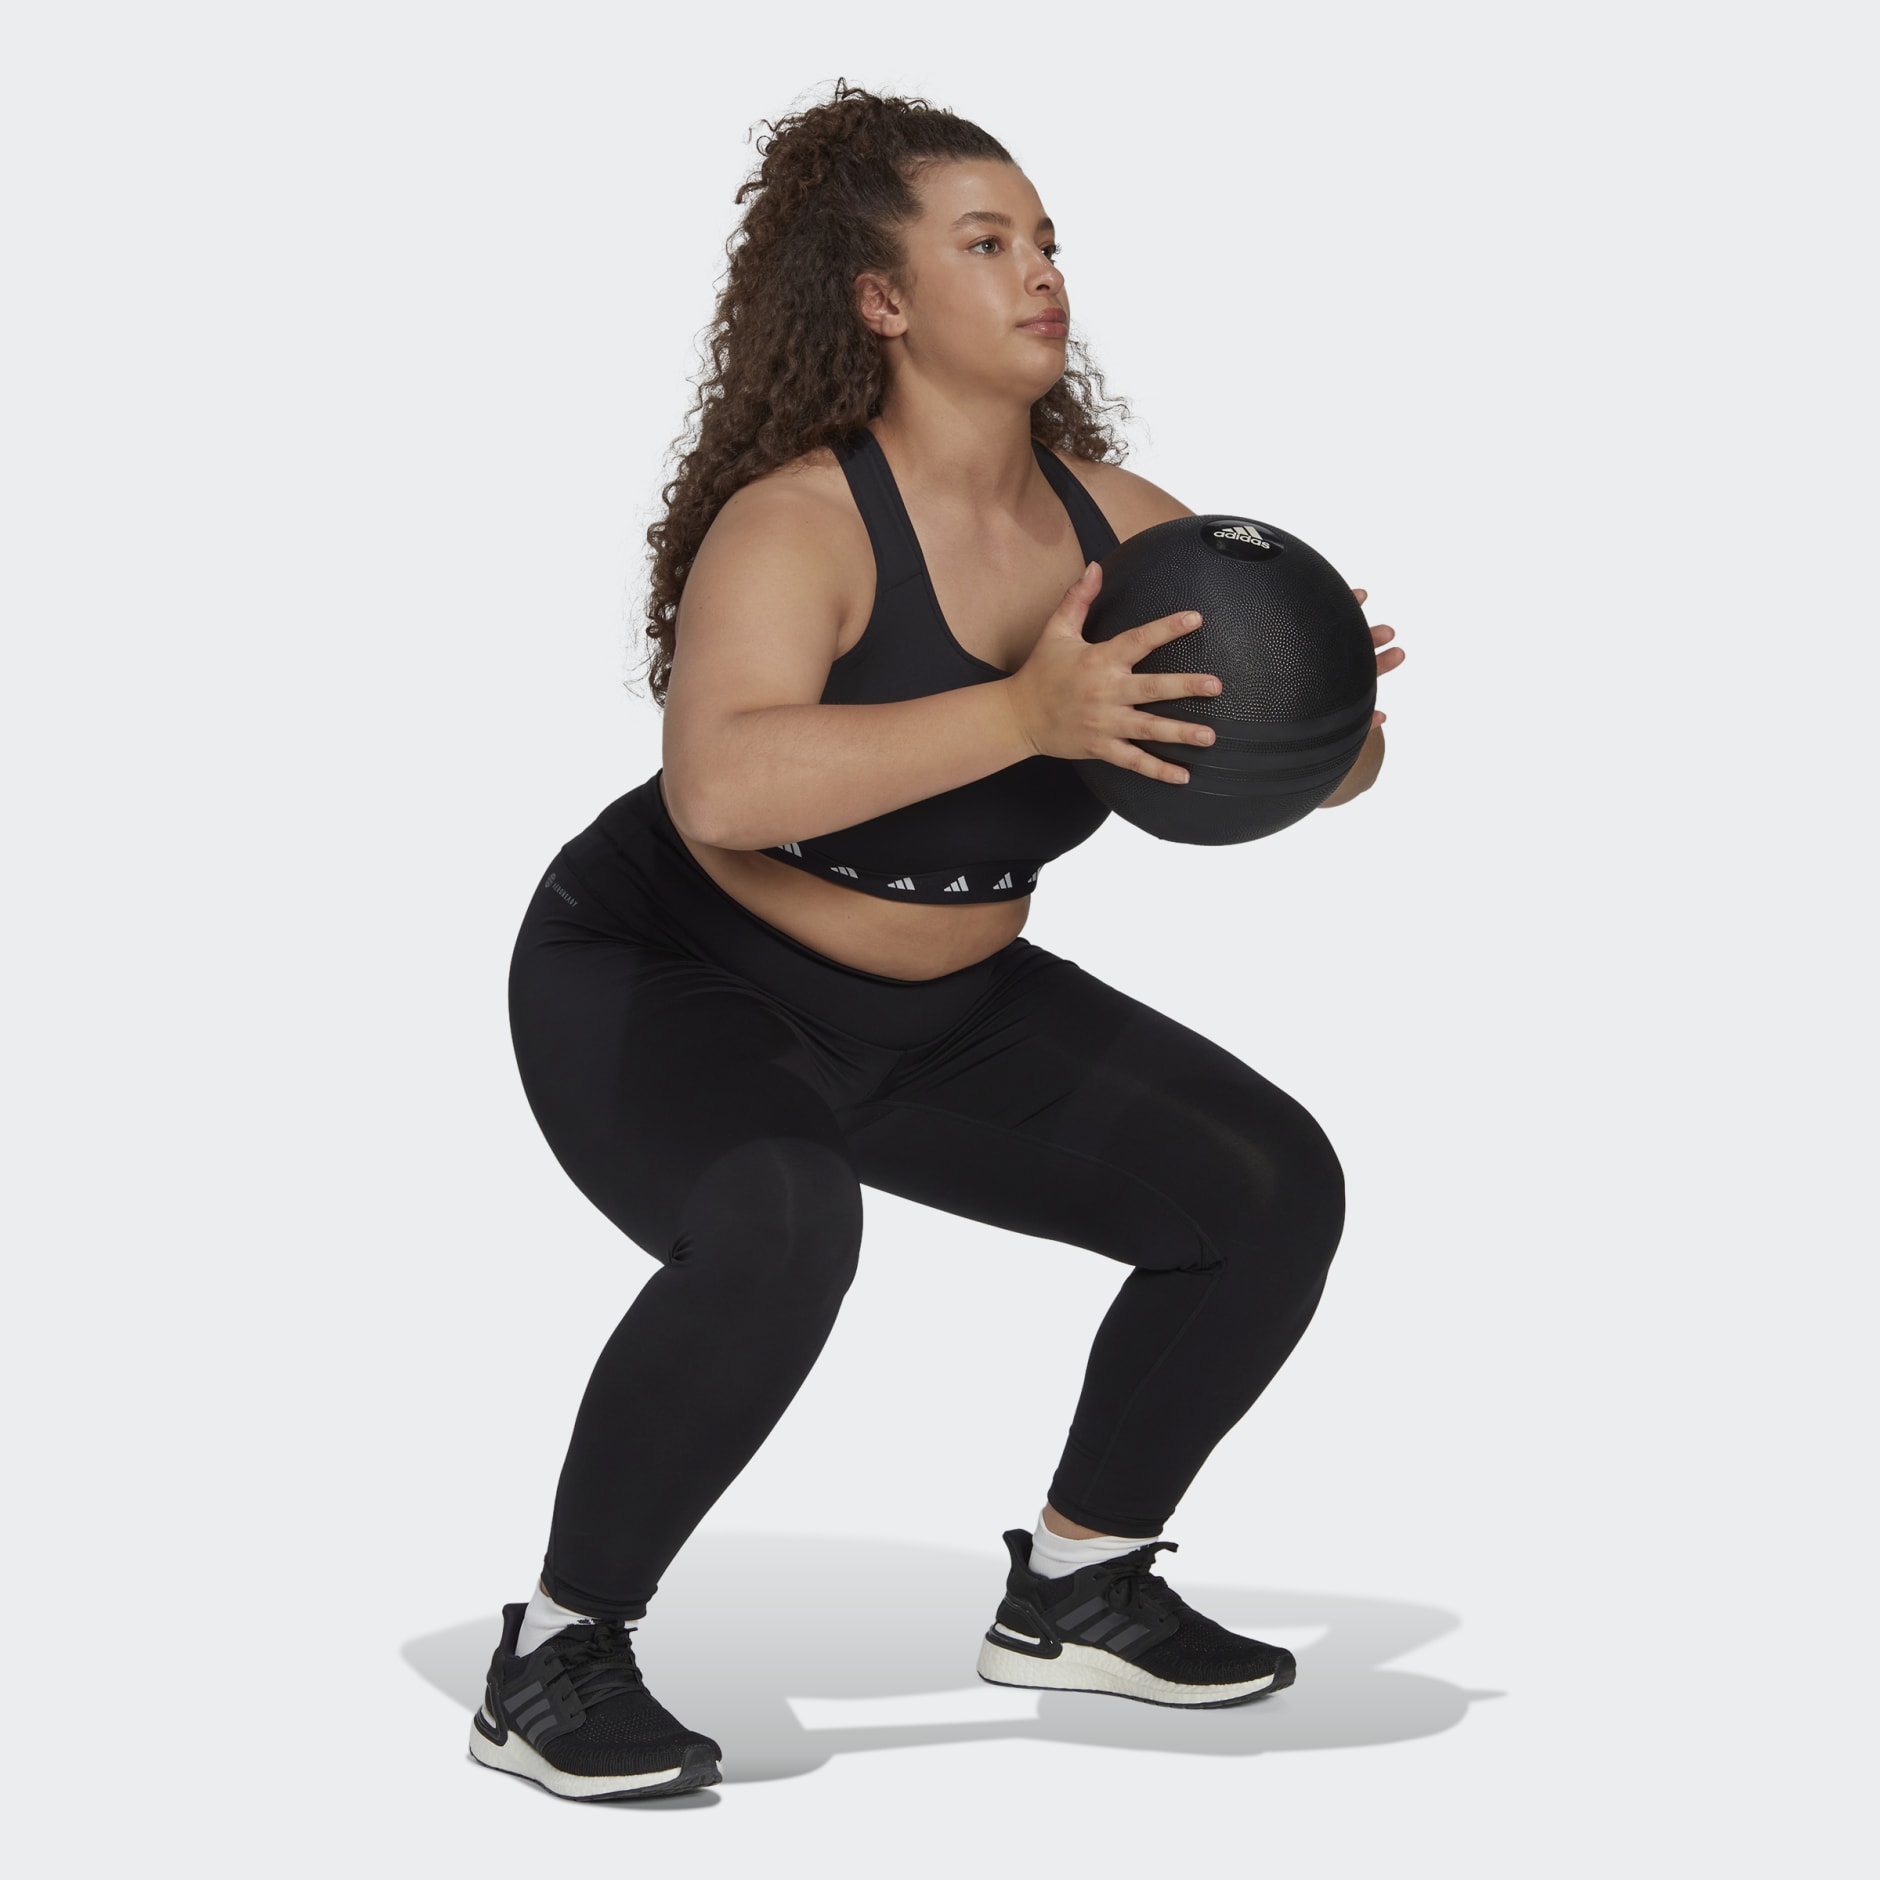 Elevate your workout with the Adidas Techfit bra